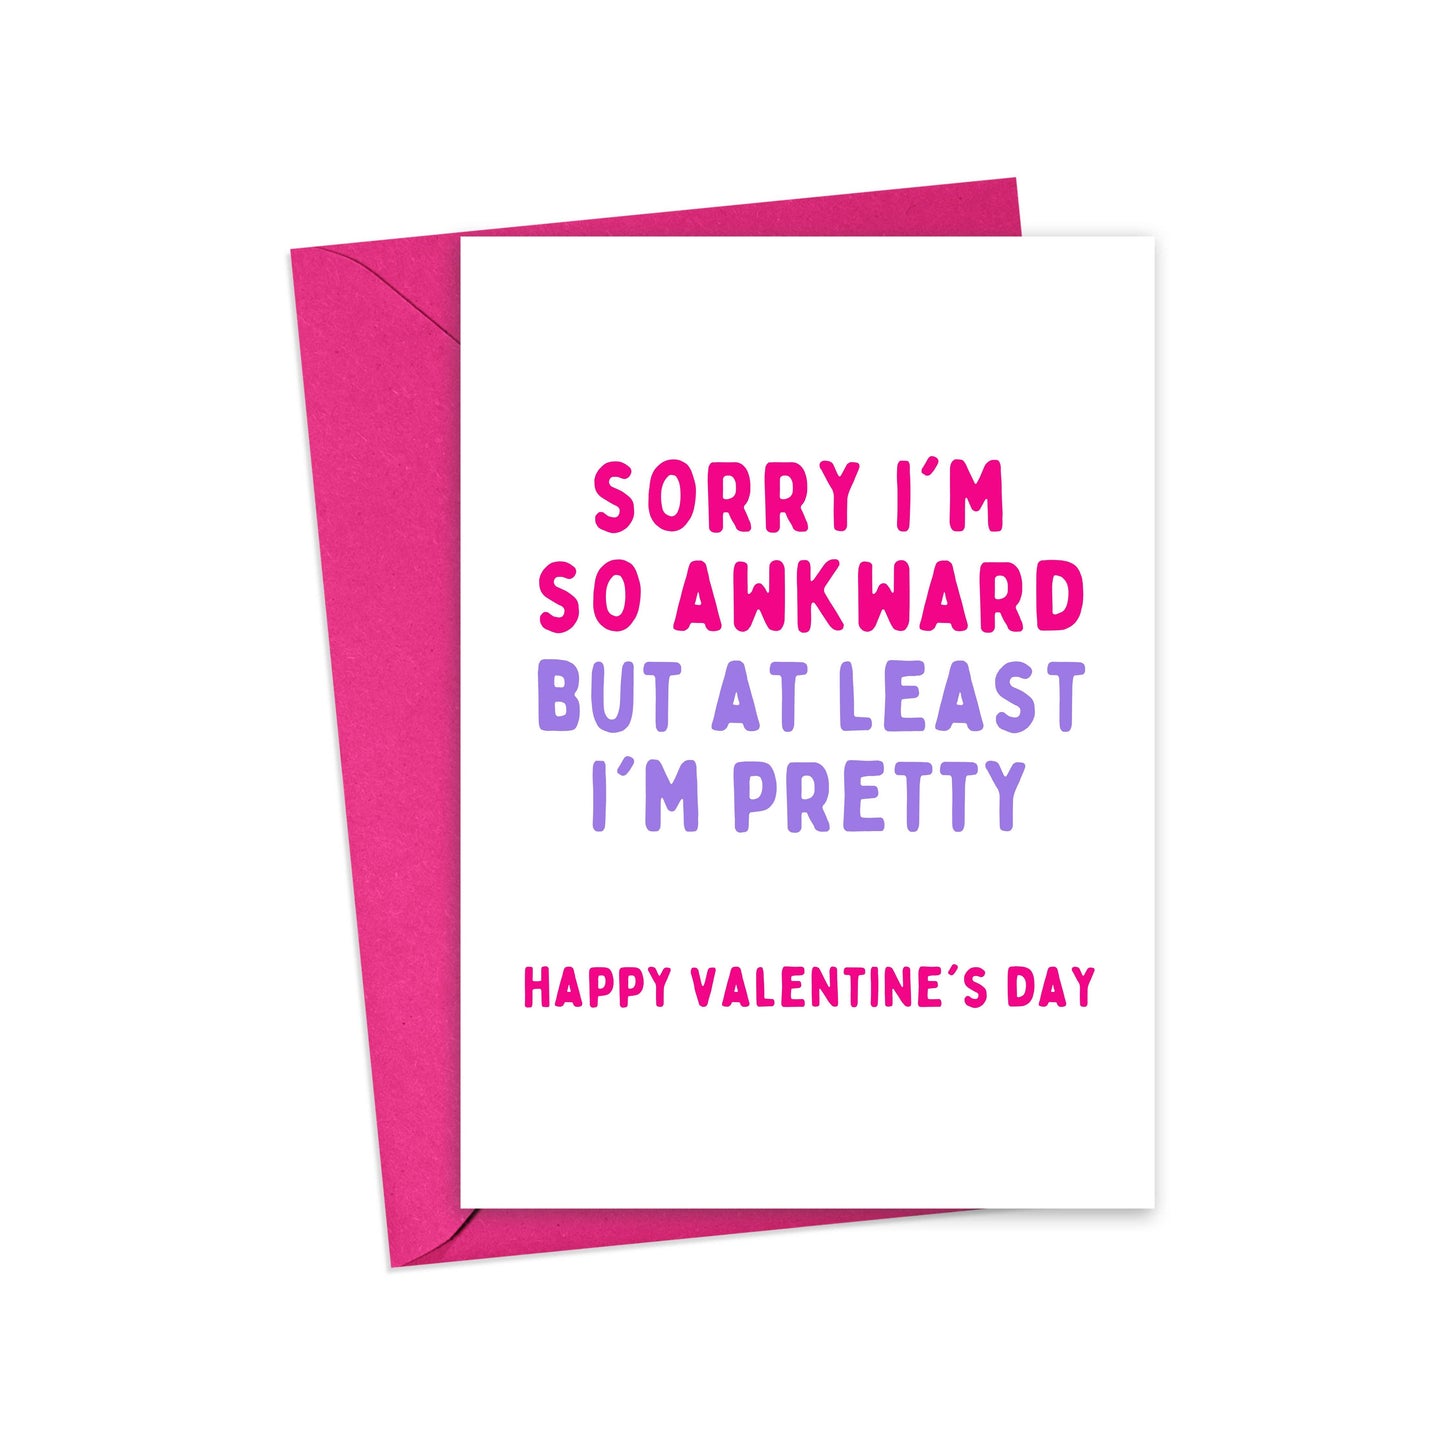 R is for Robo Greeting Card: Awkward Valentine's Day Card